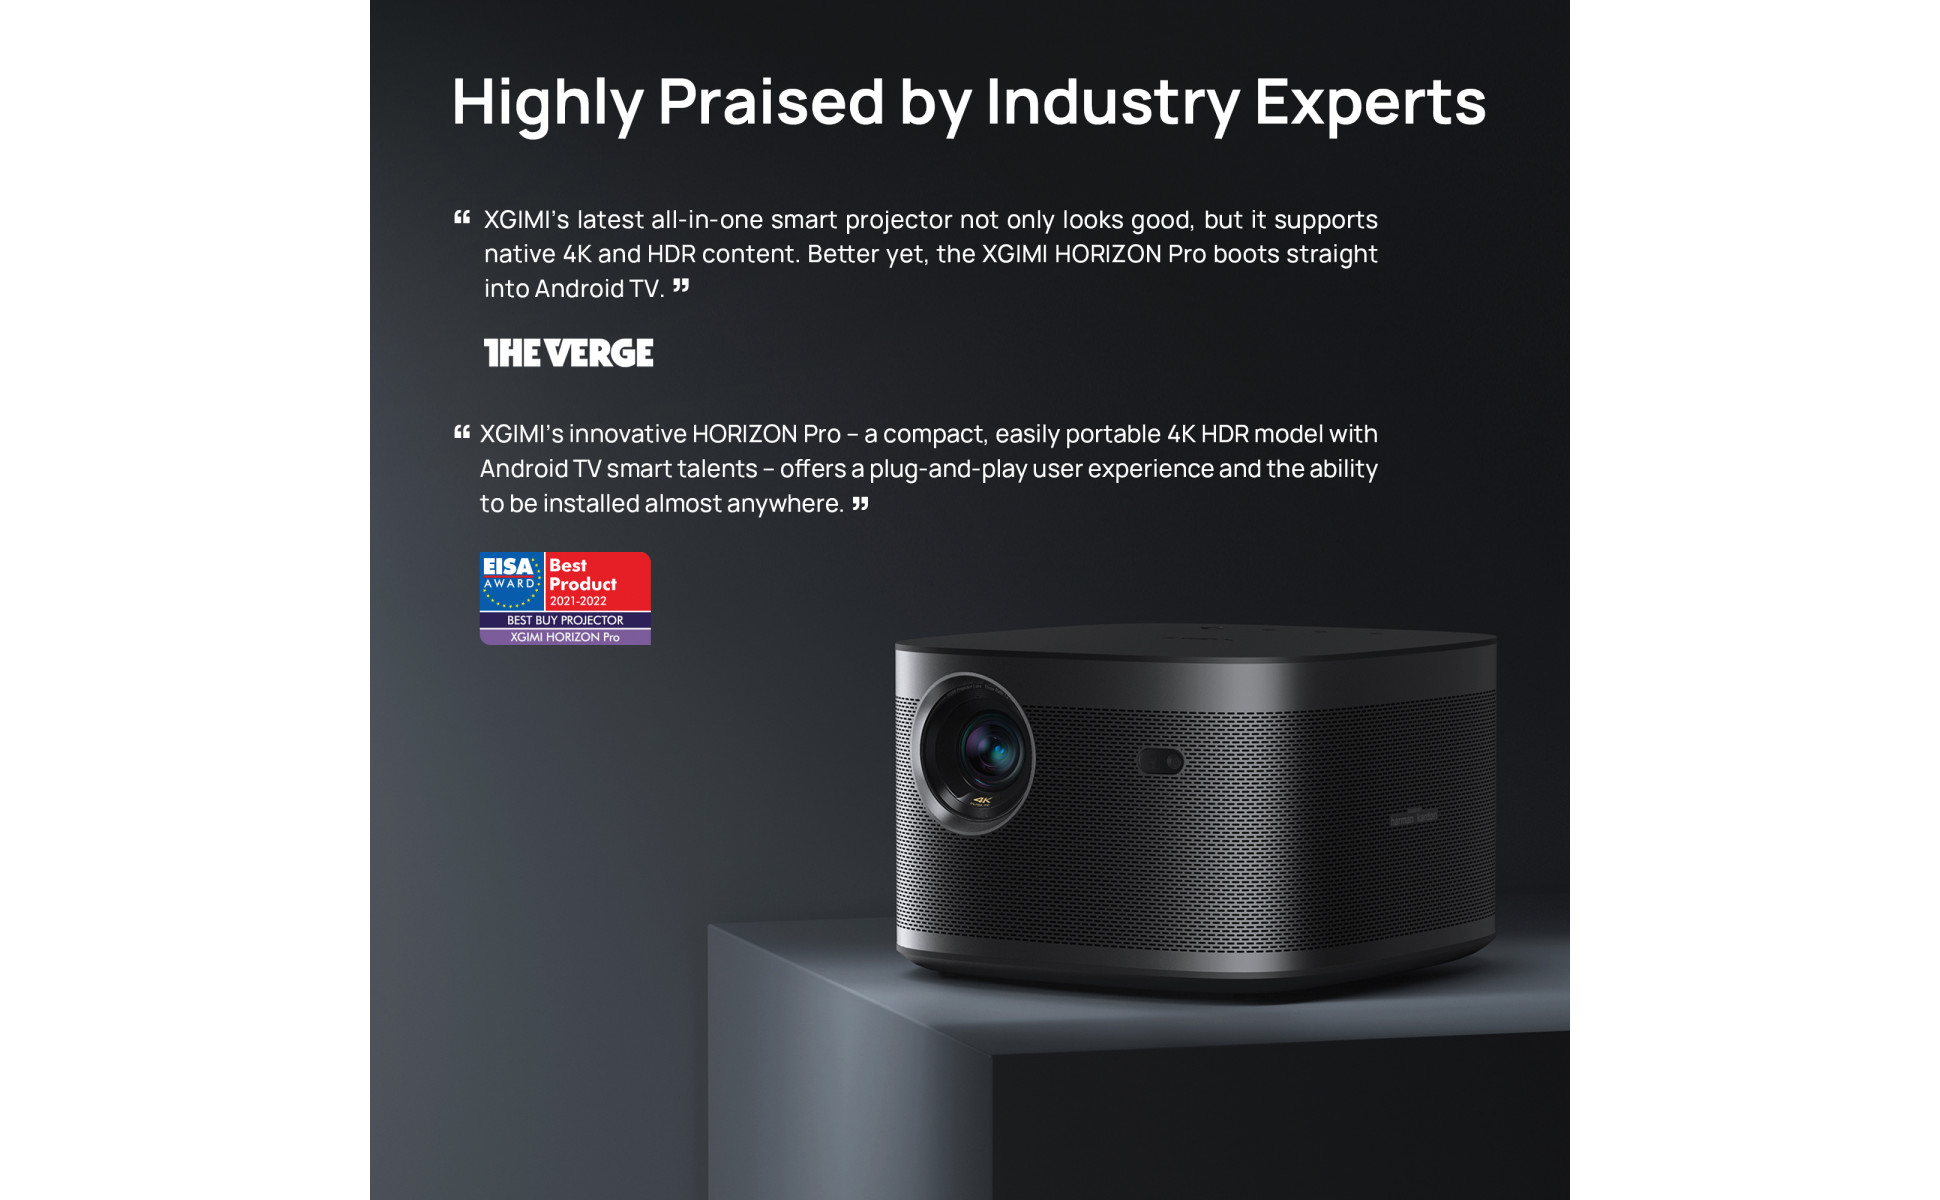 XGIMI Horizon Ultra Review: A Beautiful Dolby Vision Projector That Adapts  to Any Room